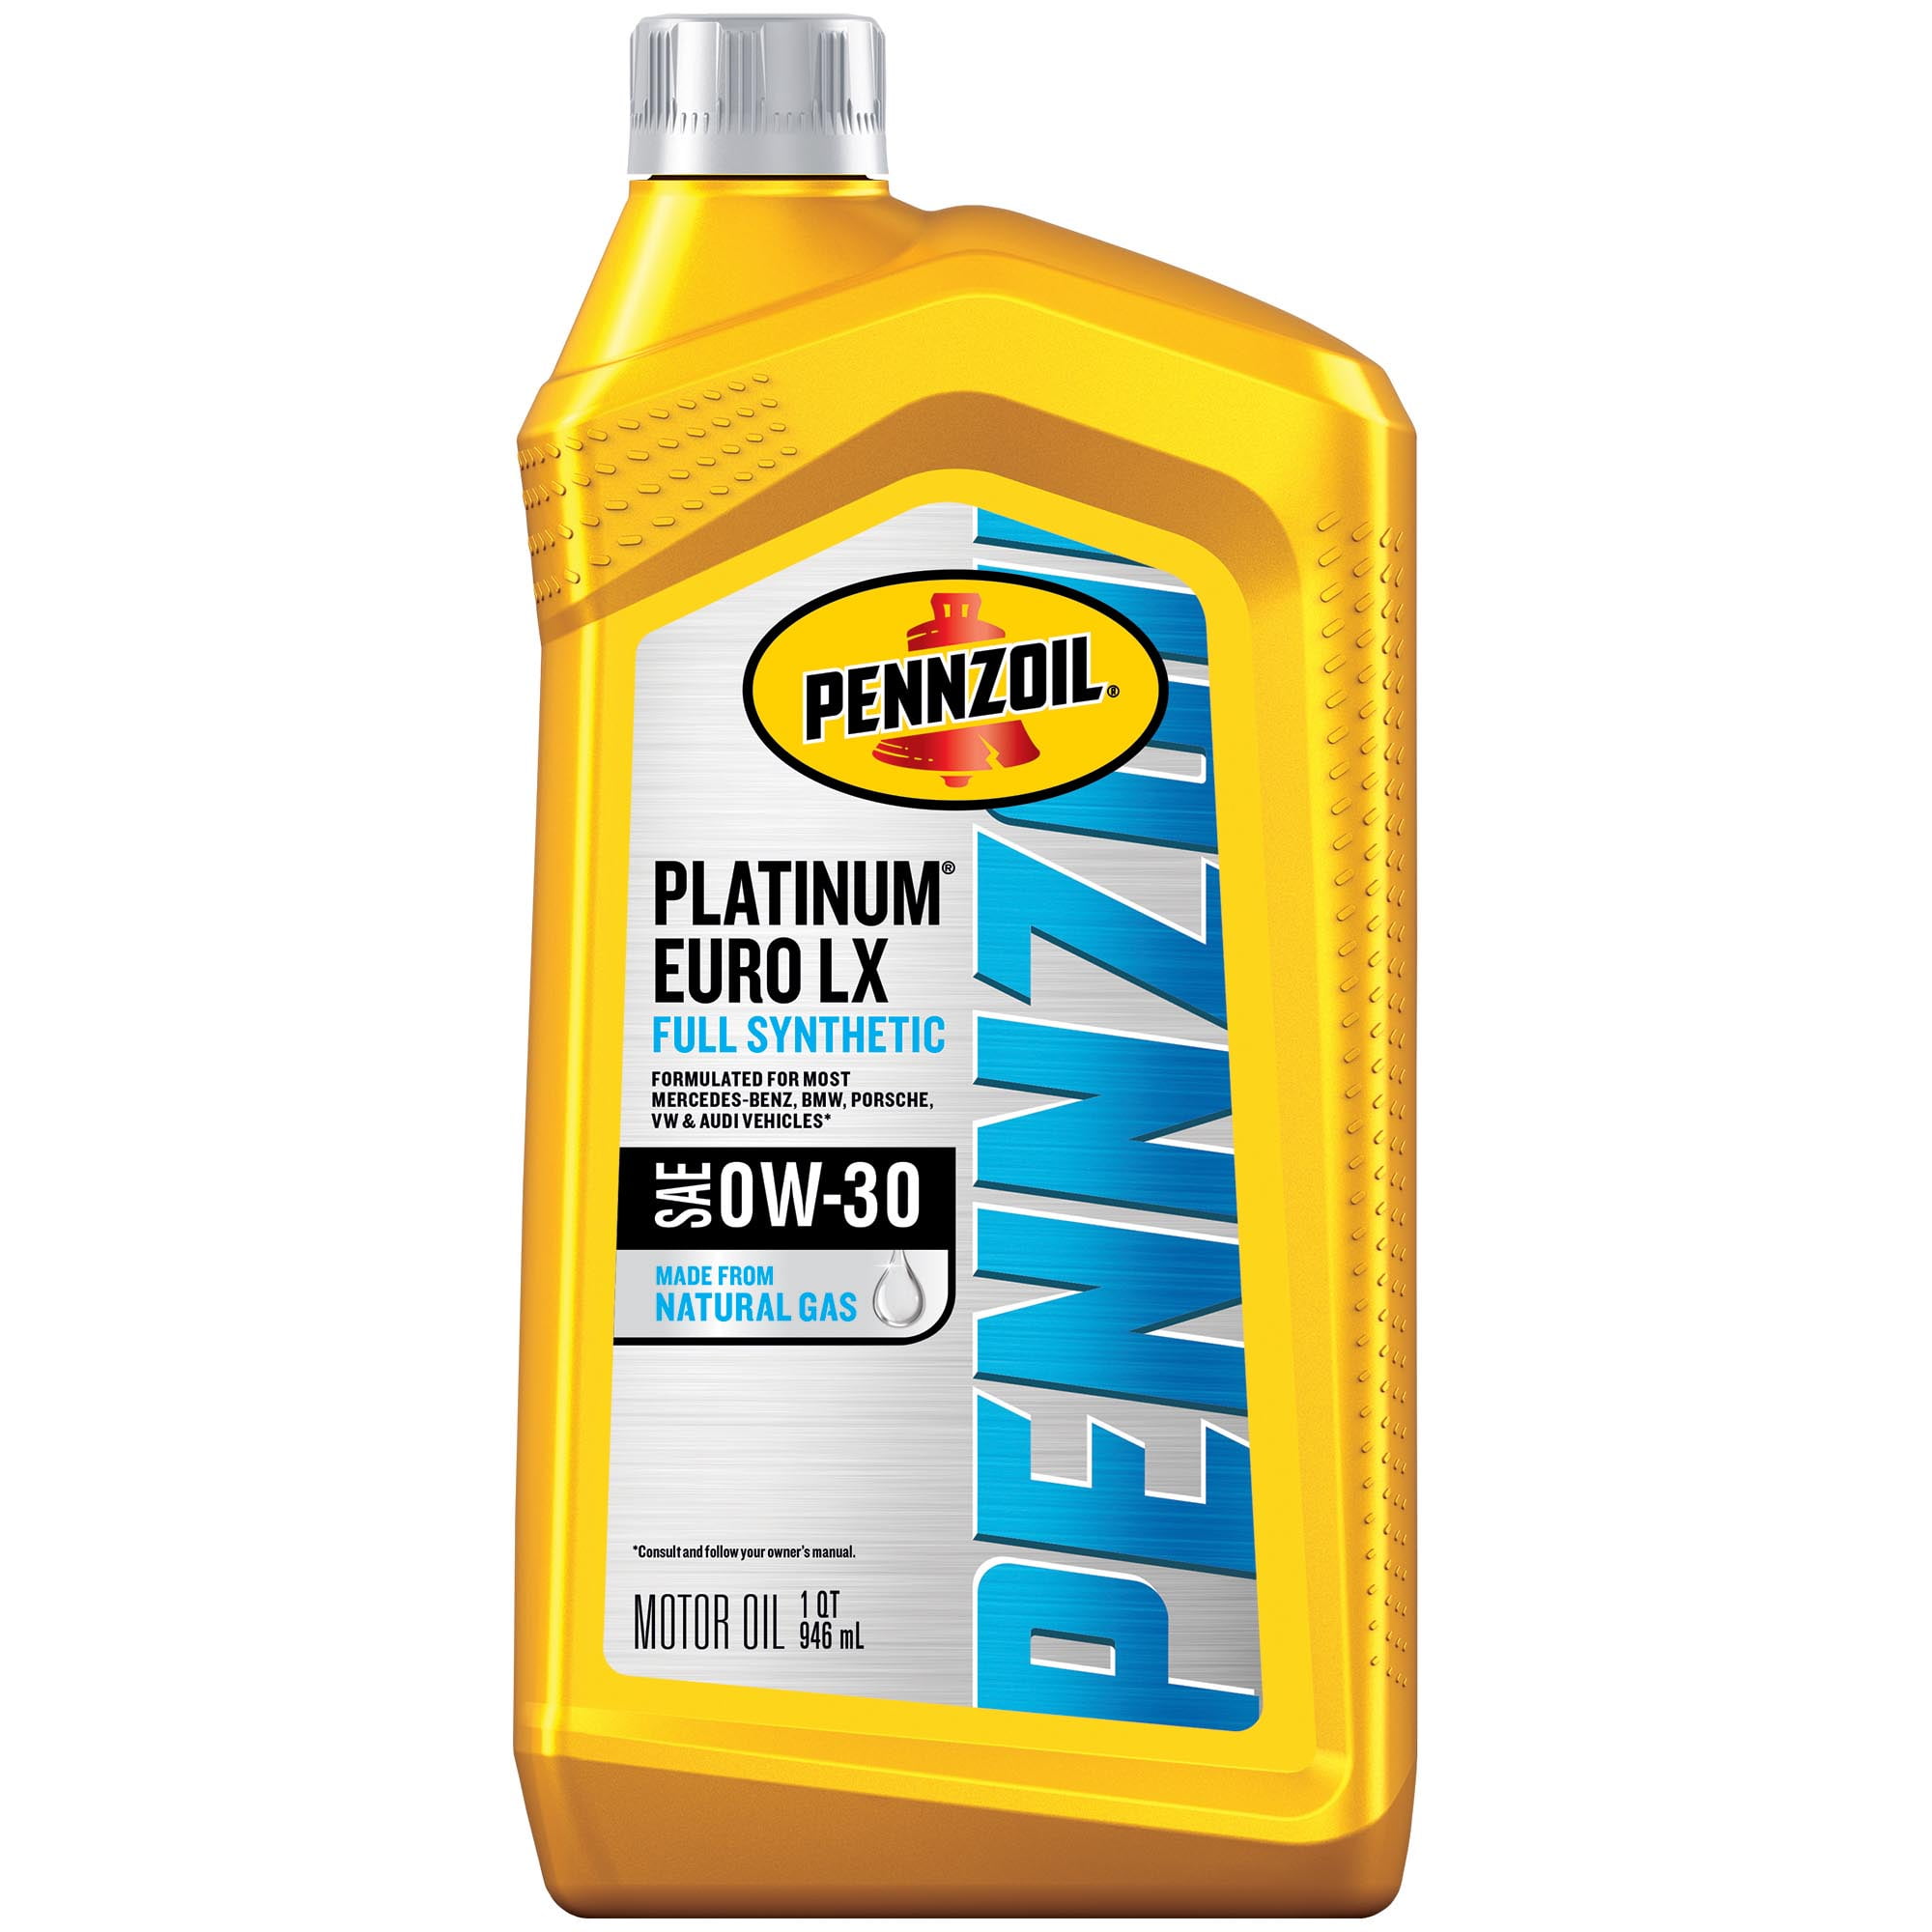 how-many-miles-is-pennzoil-platinum-full-synthetic-good-for